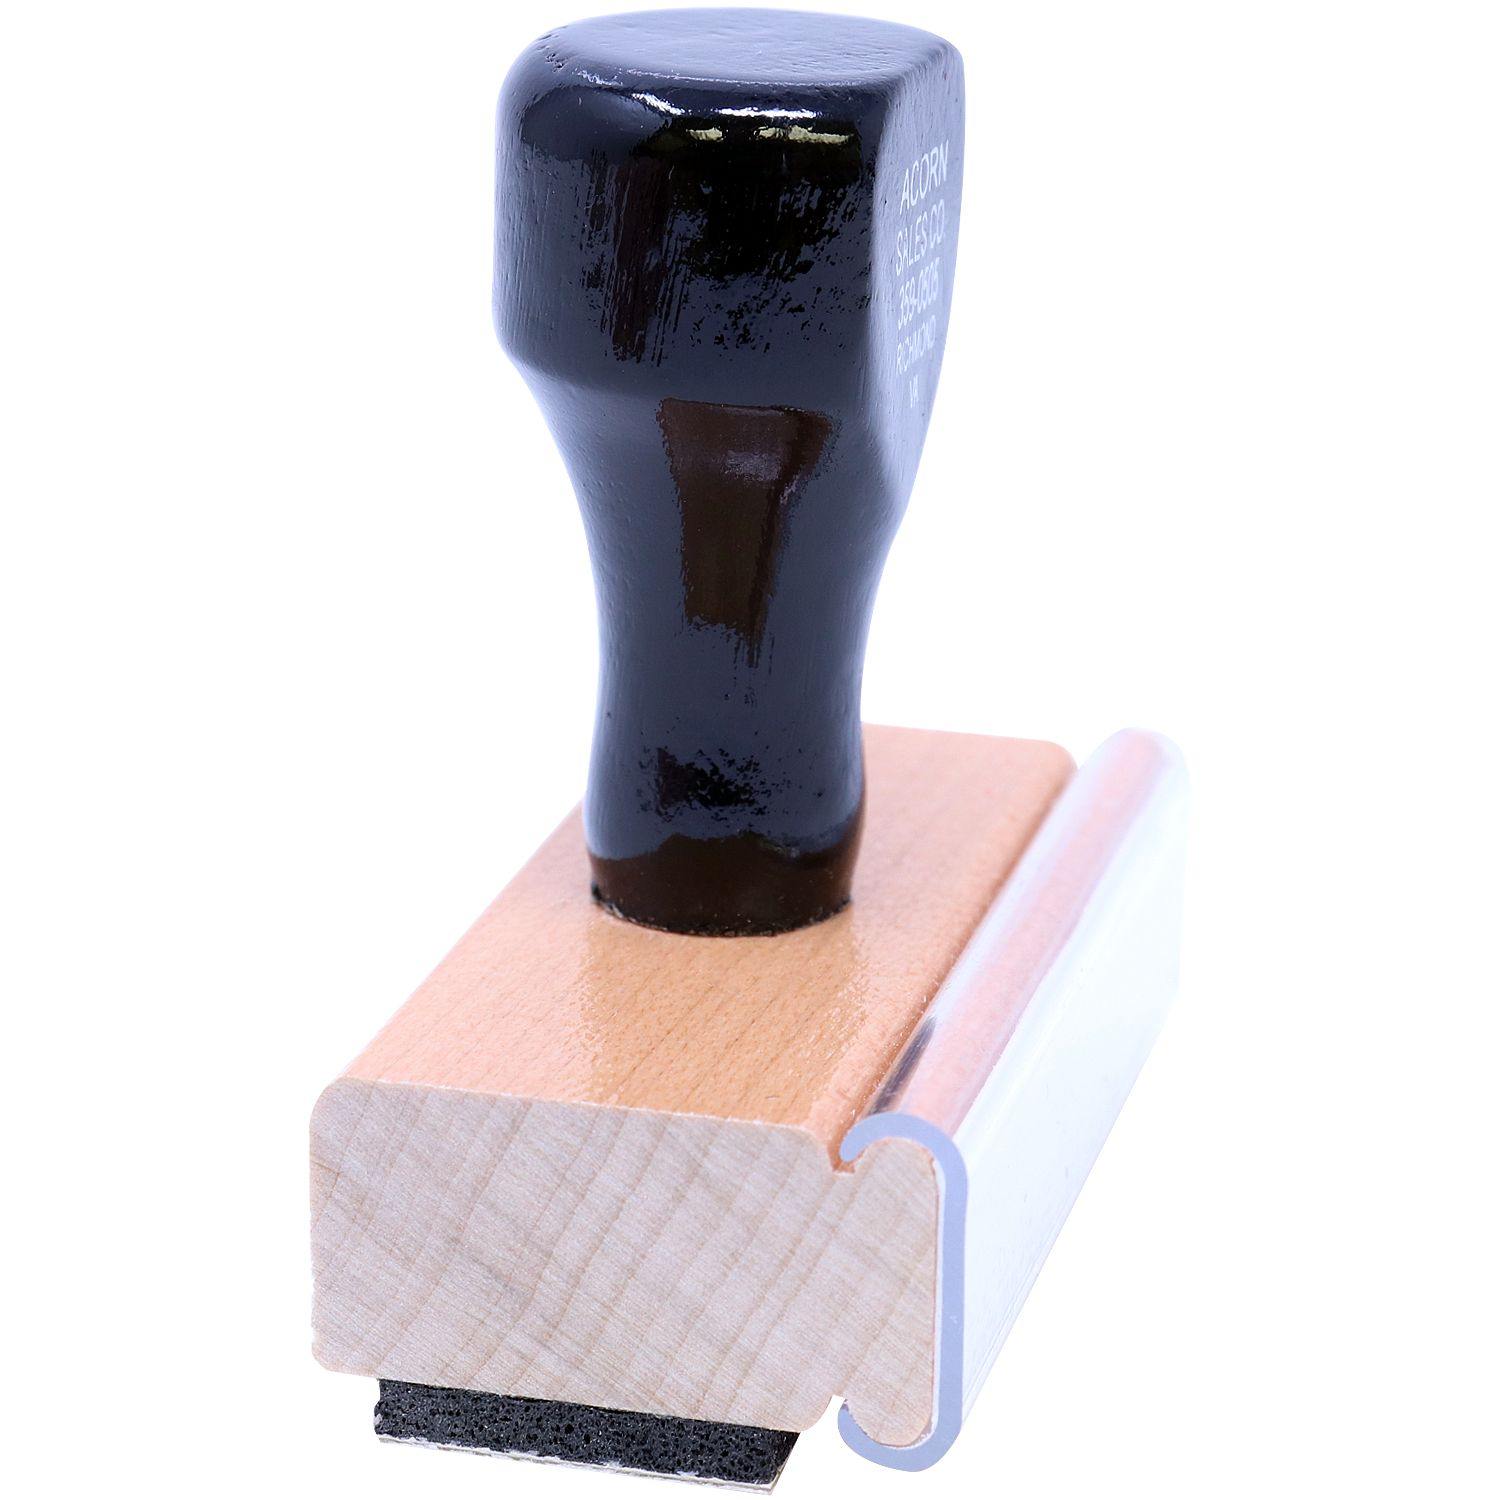 Side View of Large Narrow Font Insurance Verified Rubber Stamp at an Angle